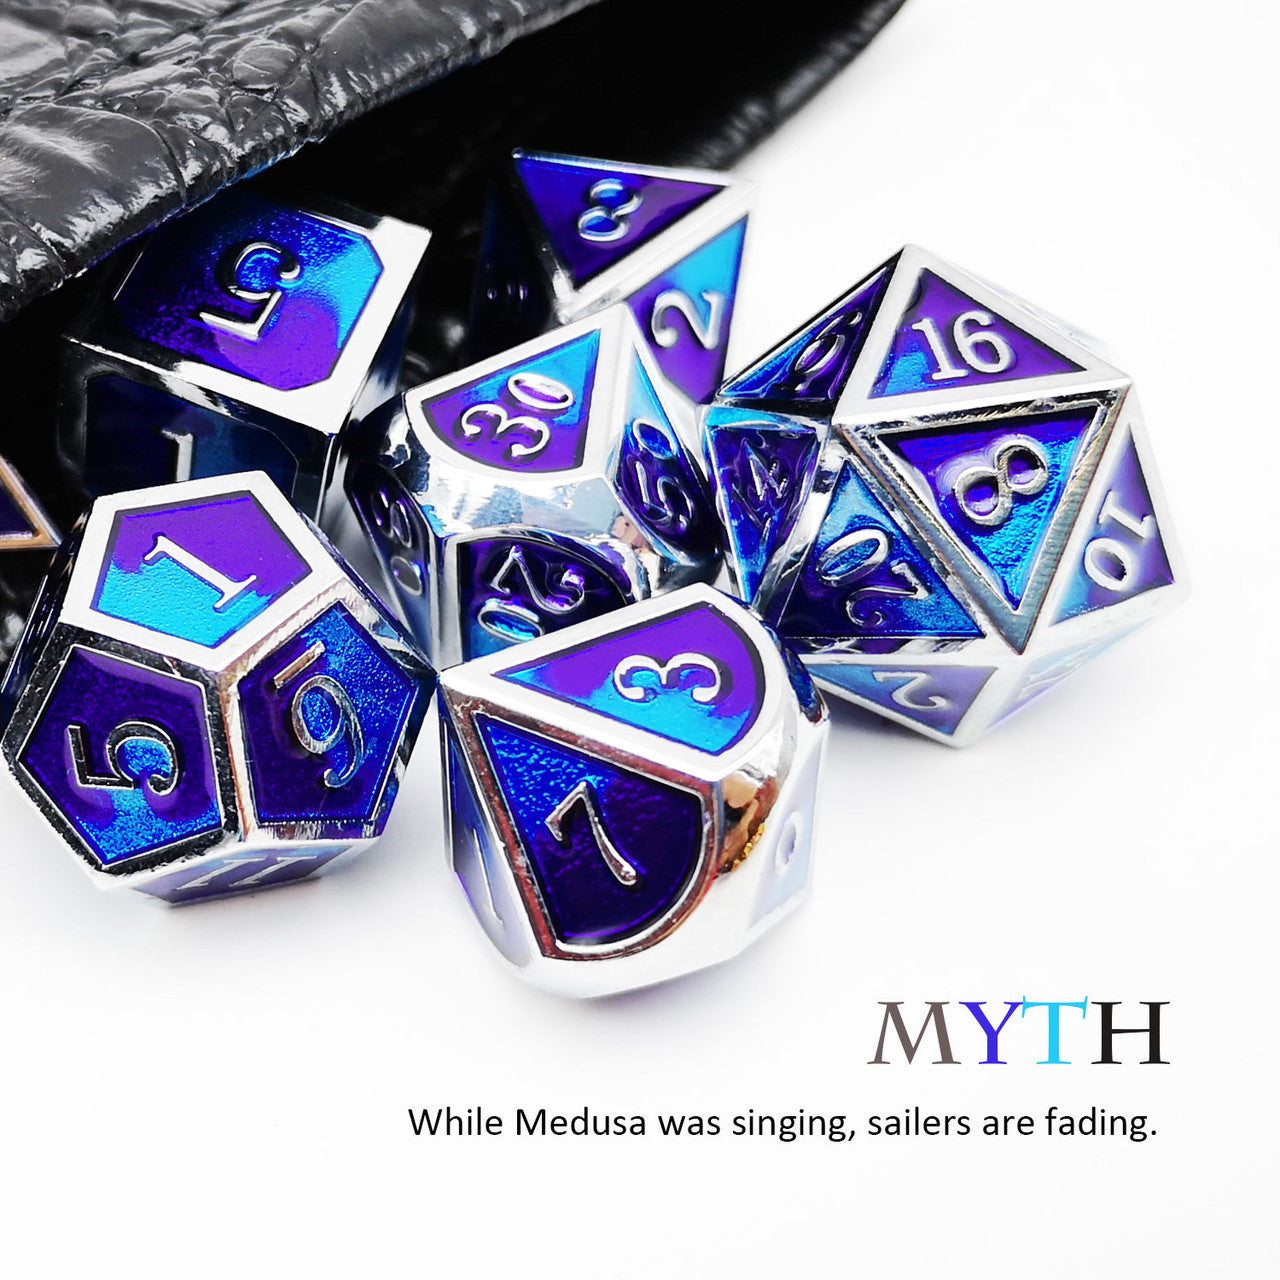 Metal DND Dice Set for Dungeons and Dragons Game-Silver Purple Blue(Myth)